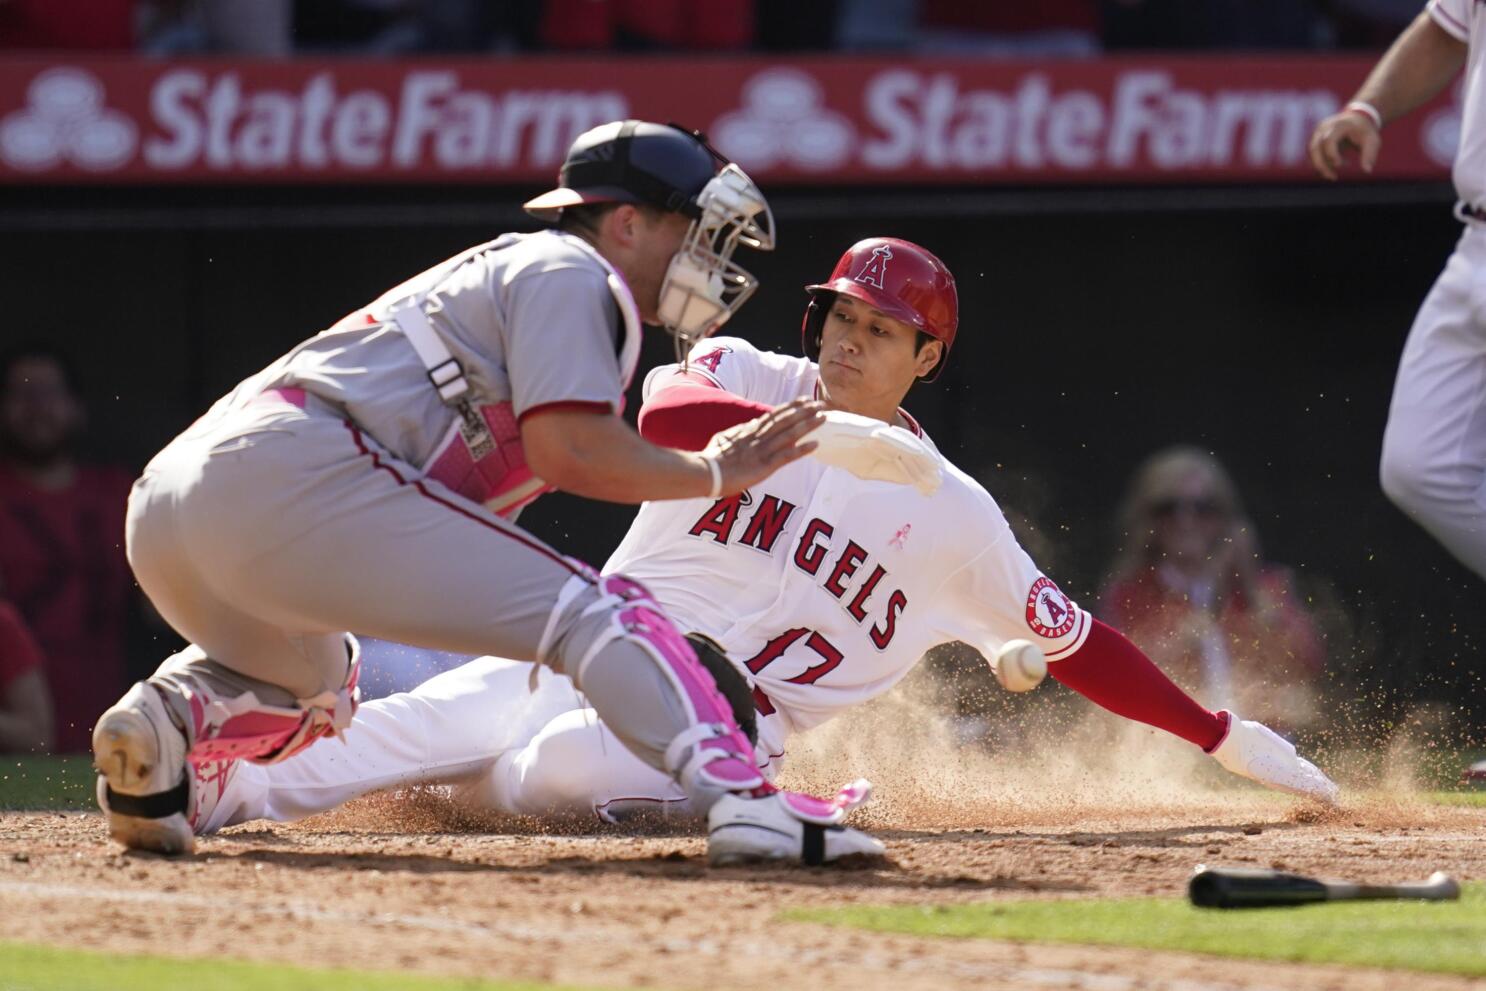 Trout homers, Angels rally in 8th to hand Astros 1st loss